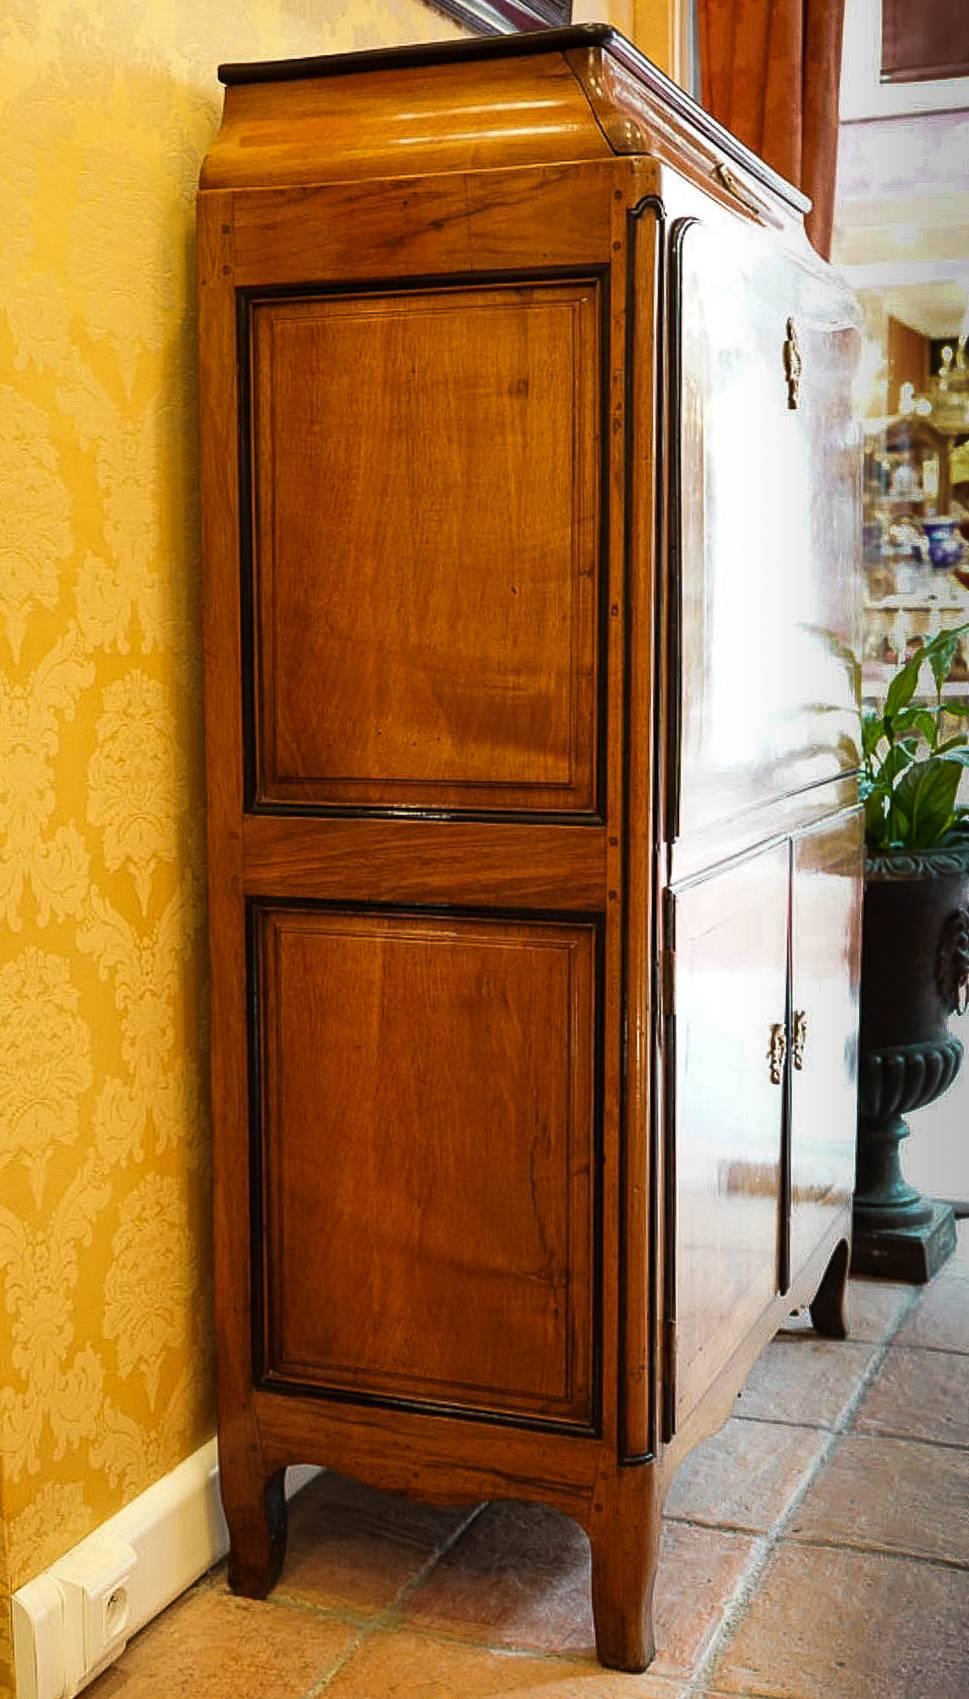 We are pleased to present you, an excellent and gorgeous mid-18th century, French-Parisian Louis XV period, drop-front secretary in walnut. The top part in black lacquered walnut. The drop-front is decorated with a slender-net of black varnish